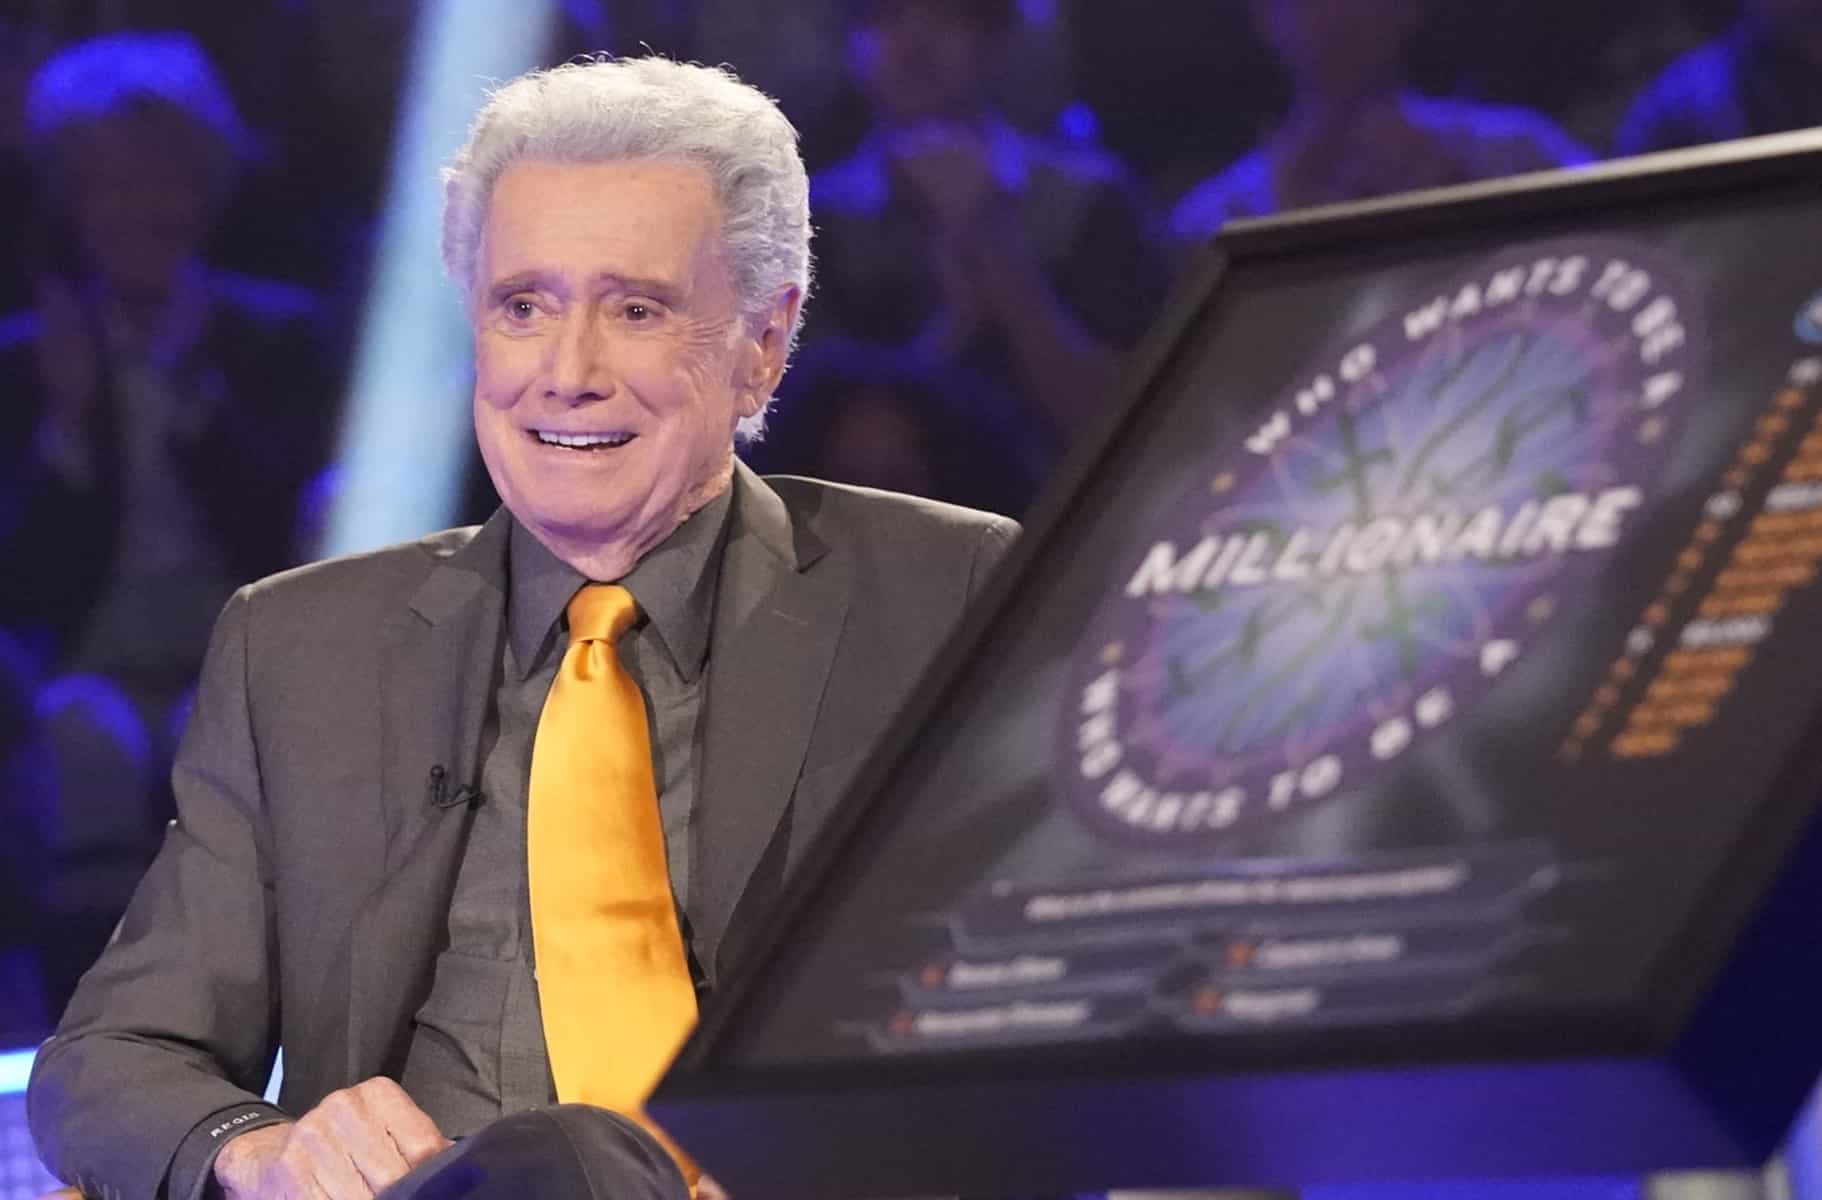 Philbin was the original host of the U.S. version of "Who Wants to Be a Millionaire"